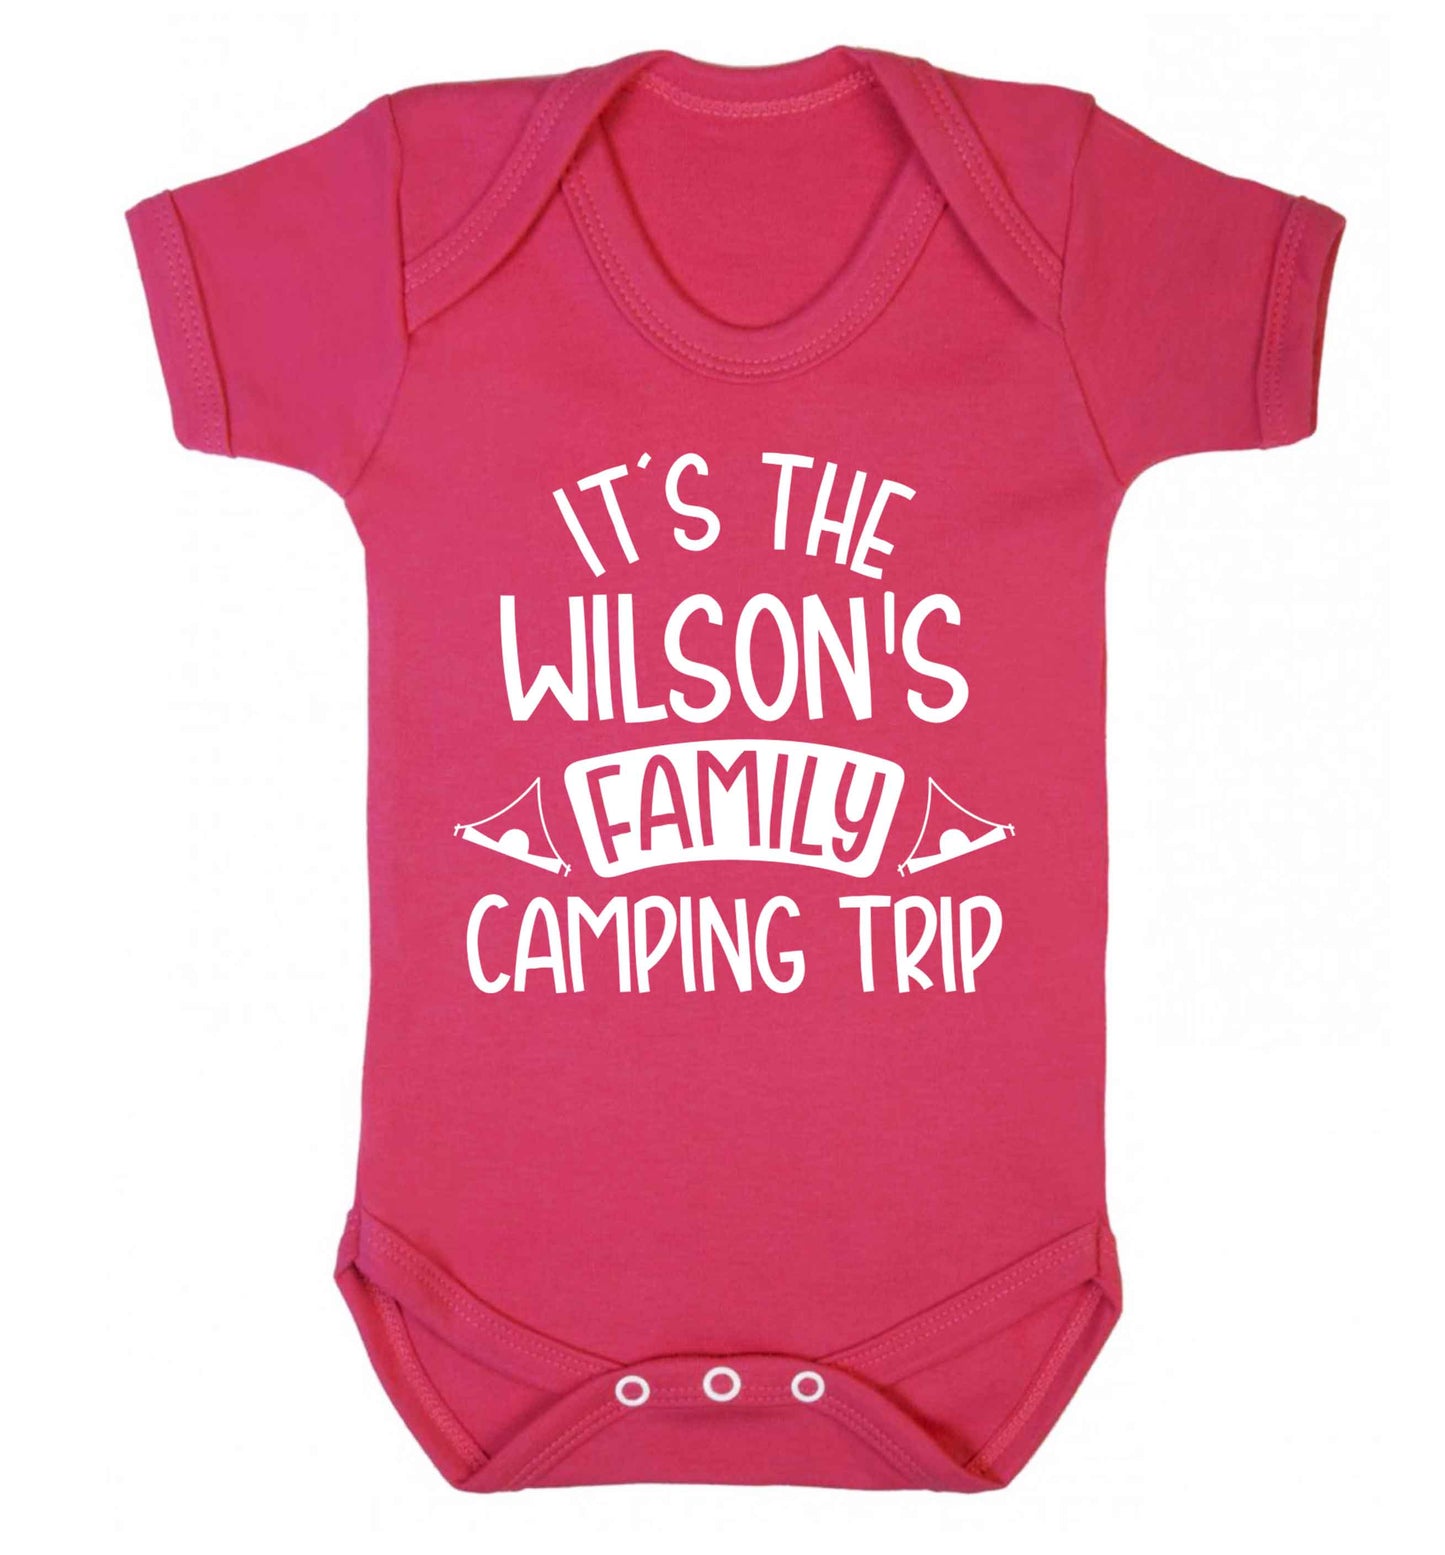 It's the Wilson's family camping trip personalised Baby Vest dark pink 18-24 months